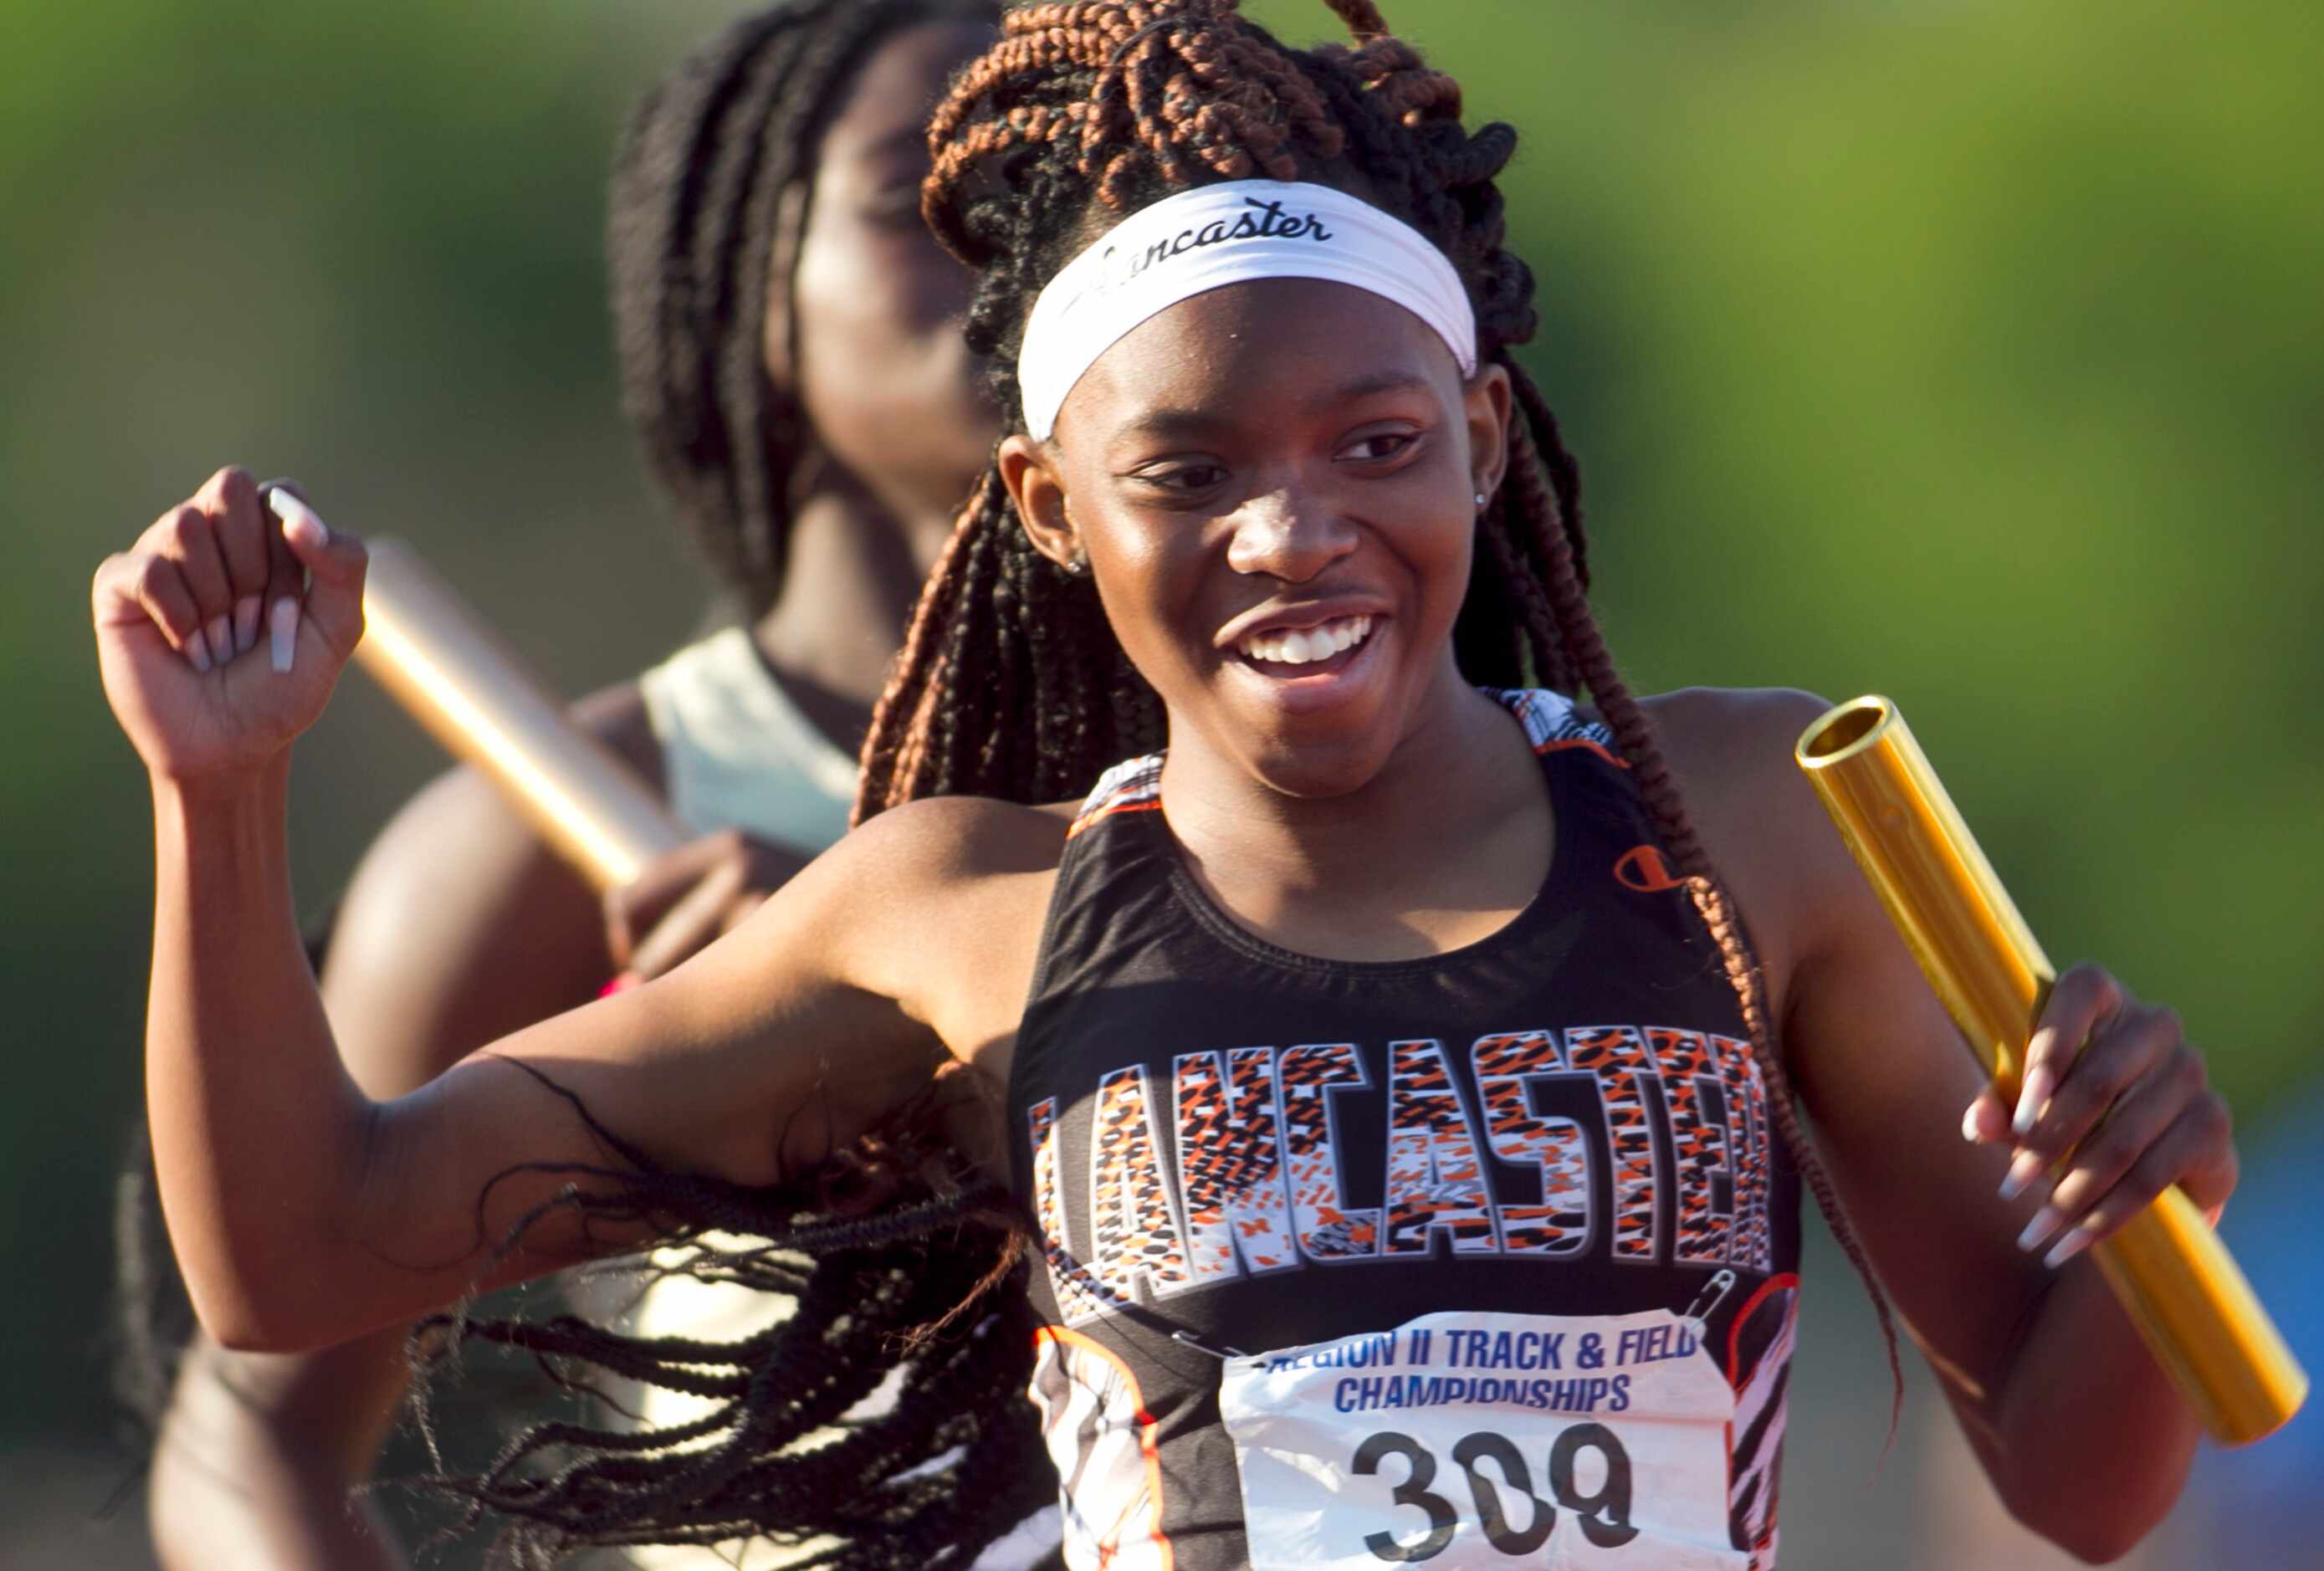 Lancaster's Addison Stricklin was all smiles as she carried the baton across the finish line...